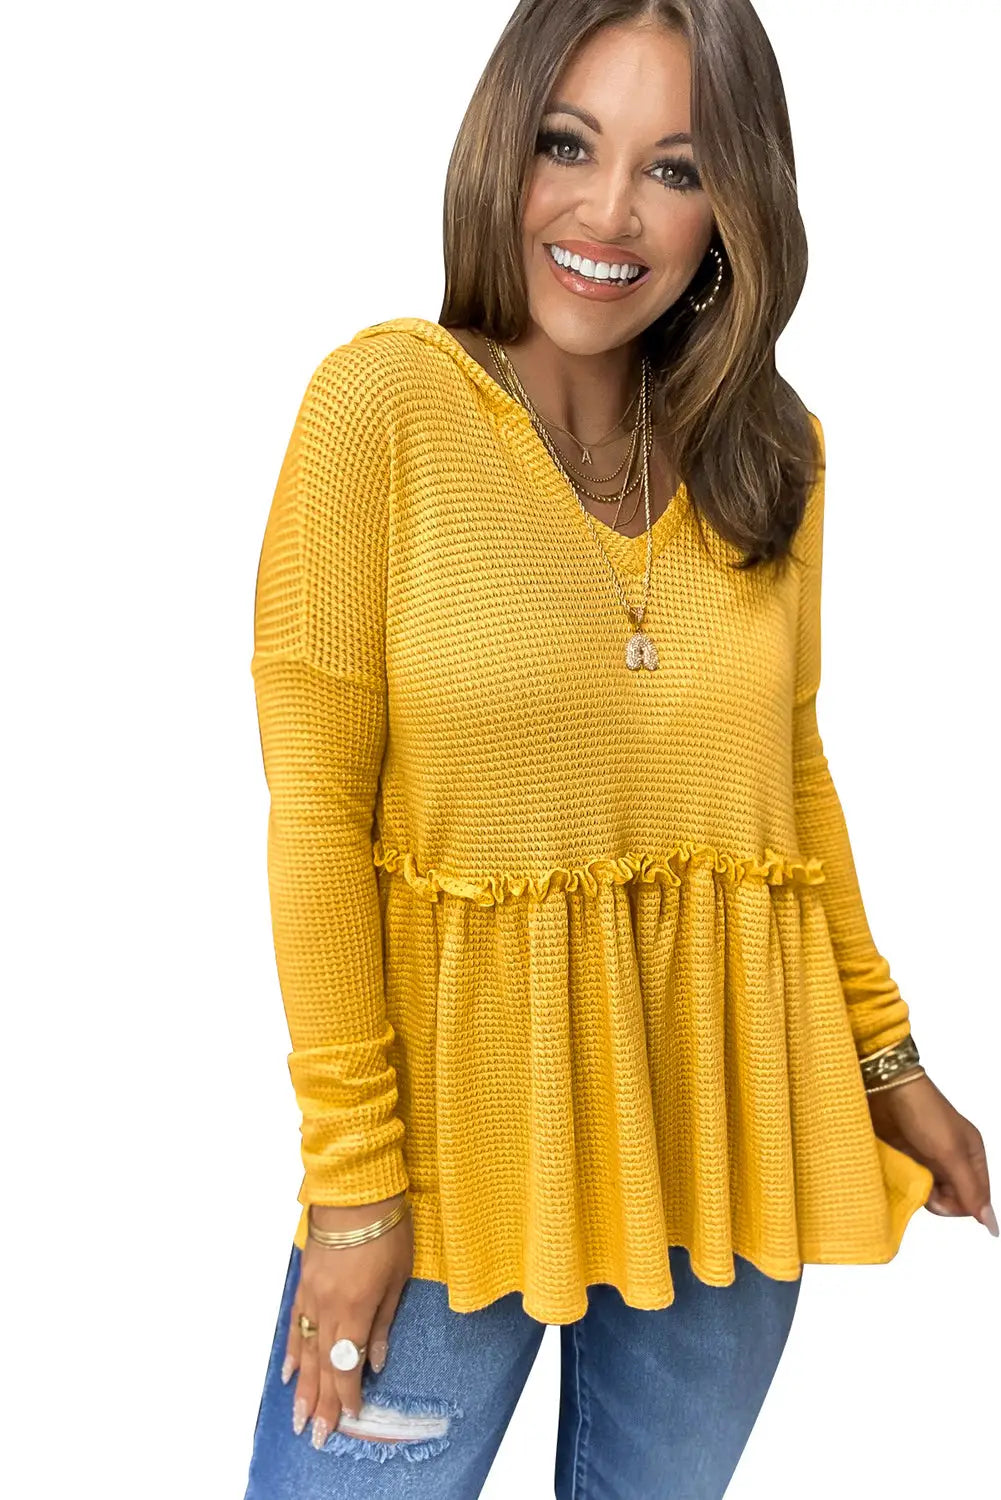 Yellow v neck drop shoulder hooded flowy top with frill - sweatshirts & hoodies